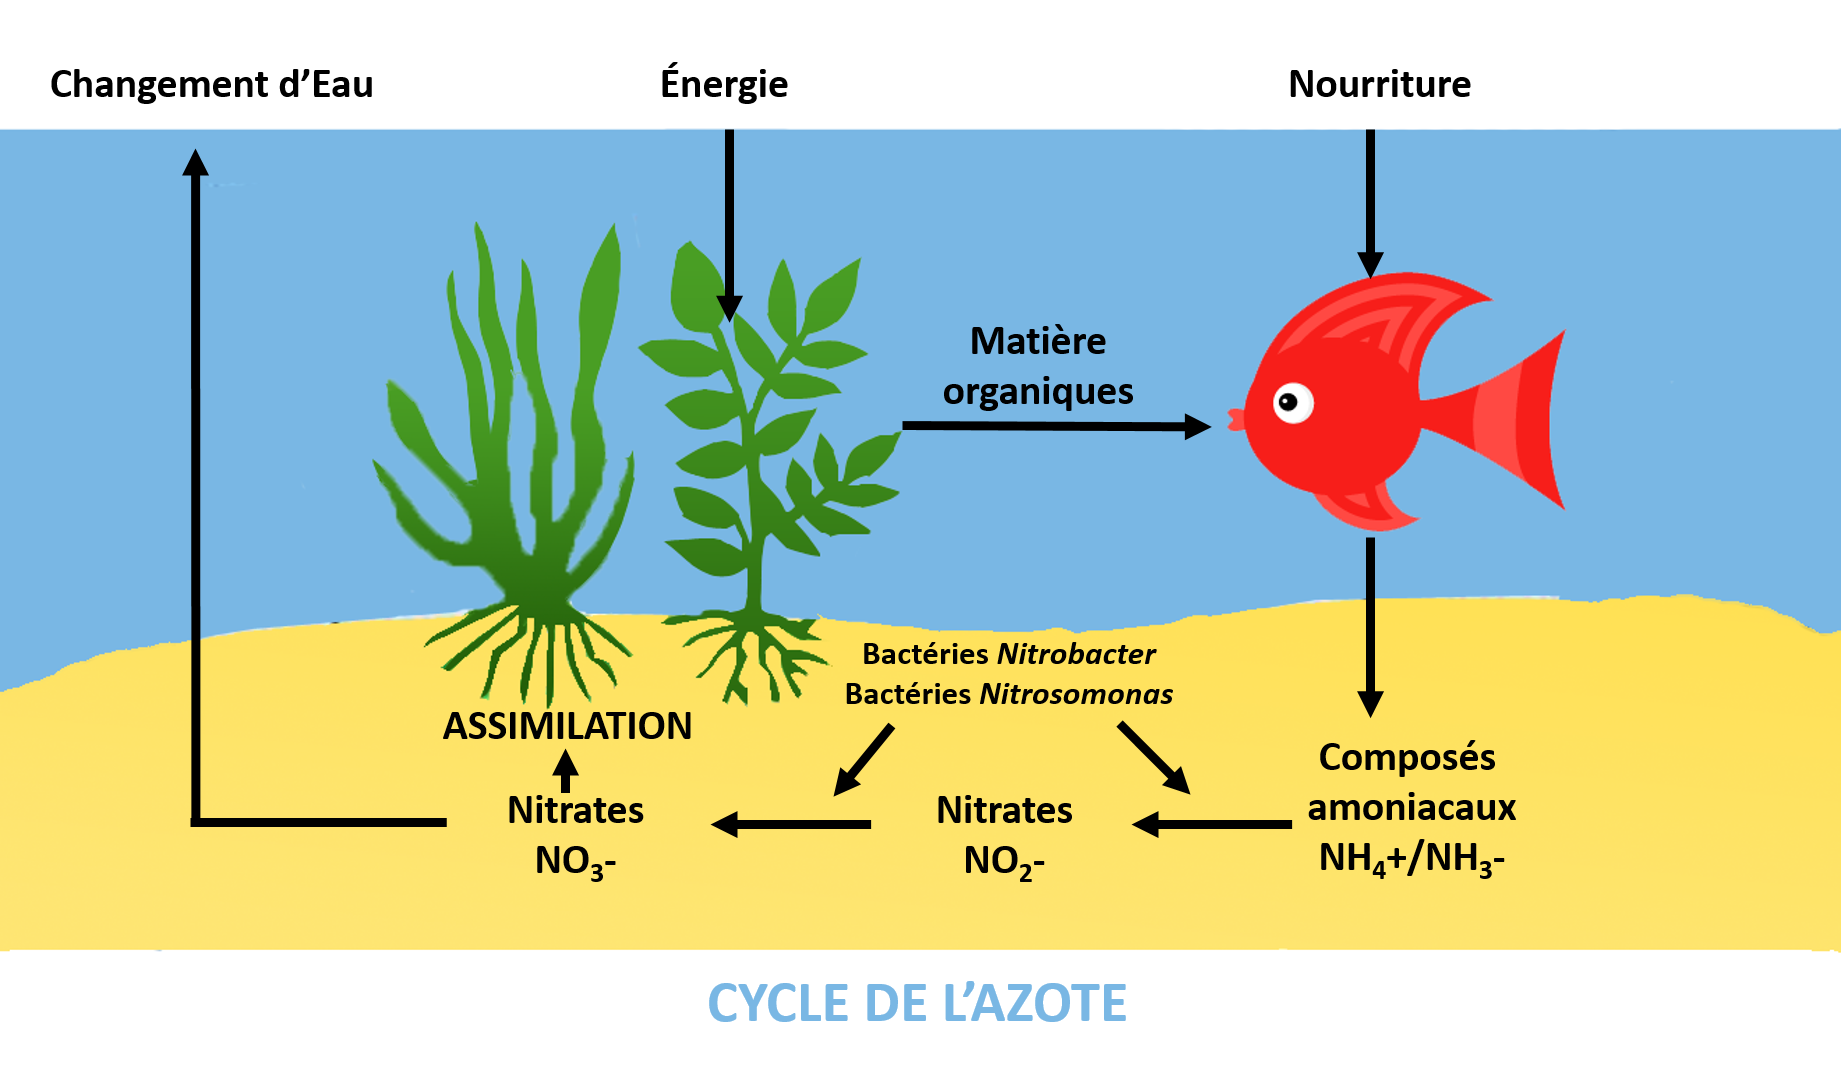 https://www.francodex.com/uploads/files/Conseils/Aquariophilie/Cycle_azote_FR.png